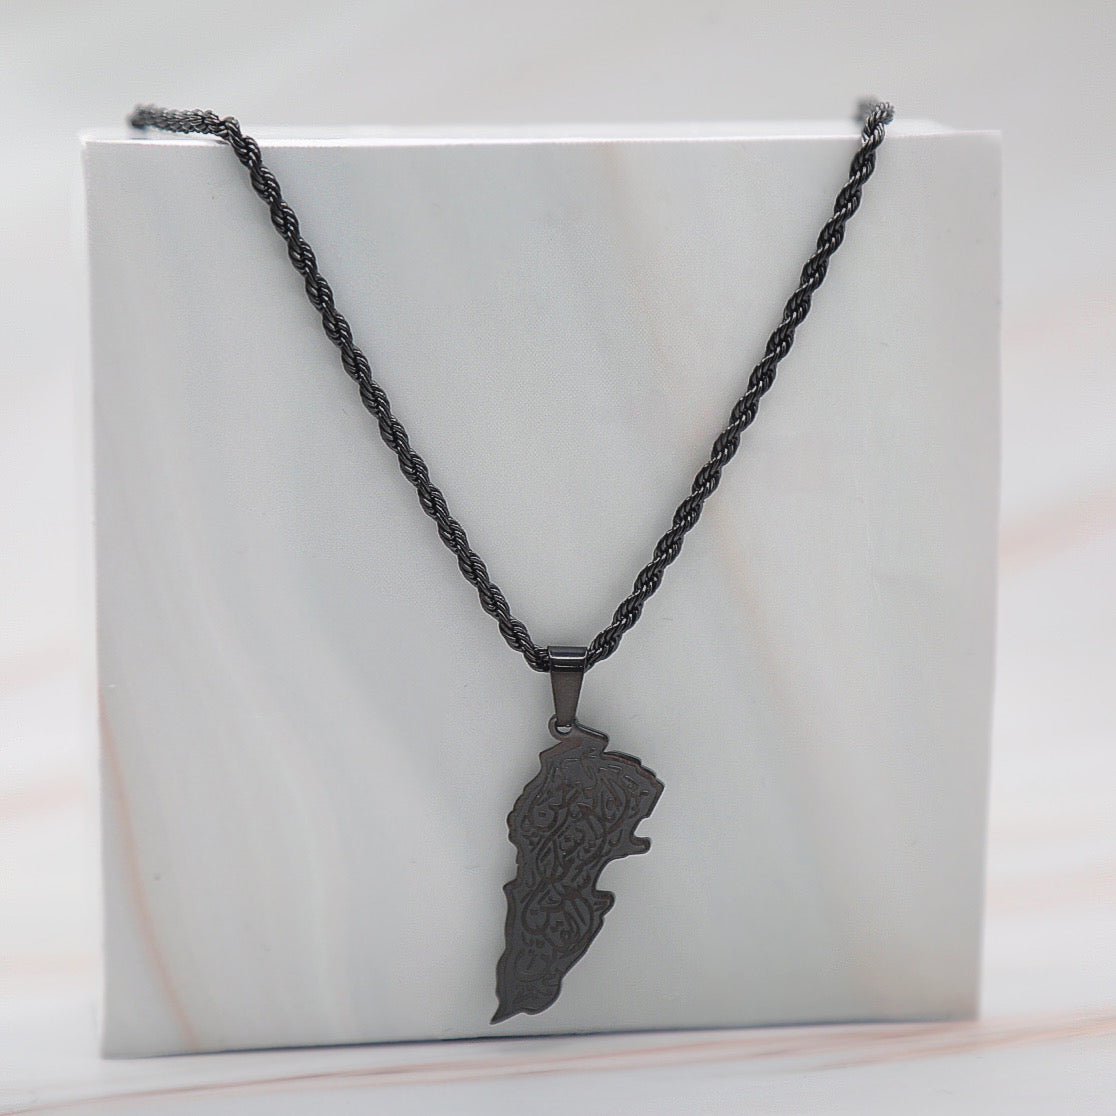 "Home is Where the Heart is" Lebanon Map Necklace